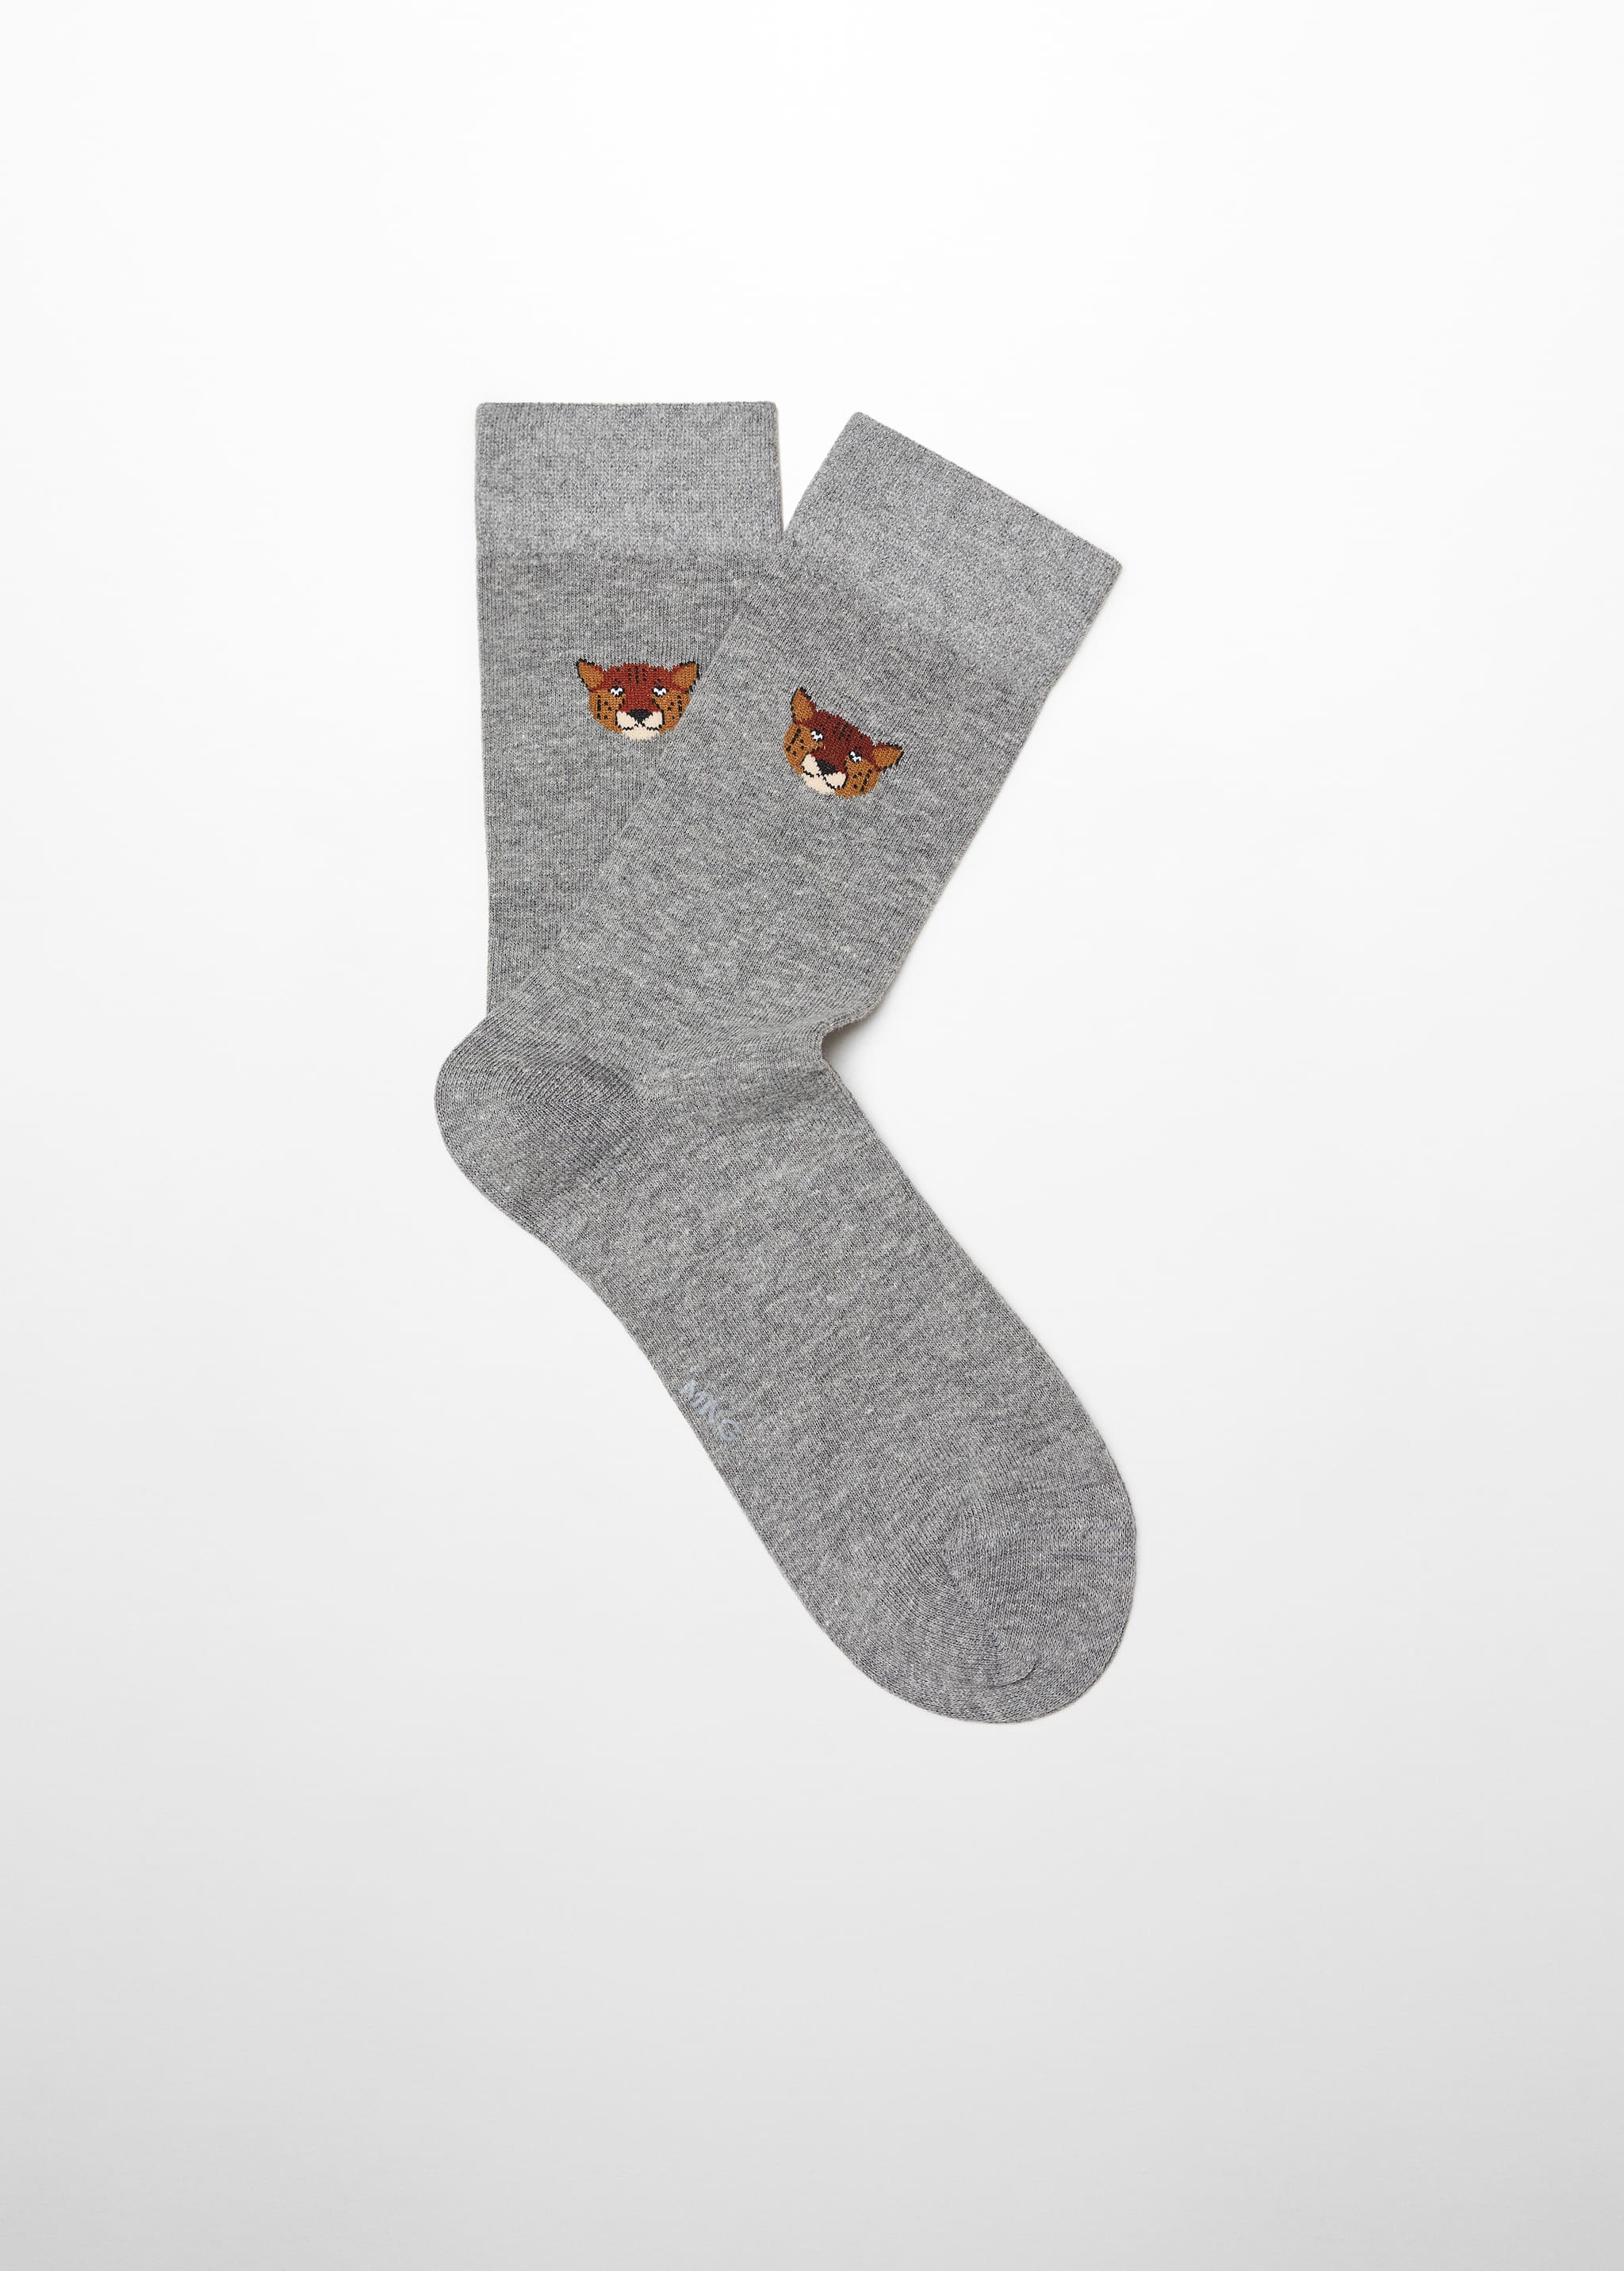 Animal embroidered cotton socks - Article without model